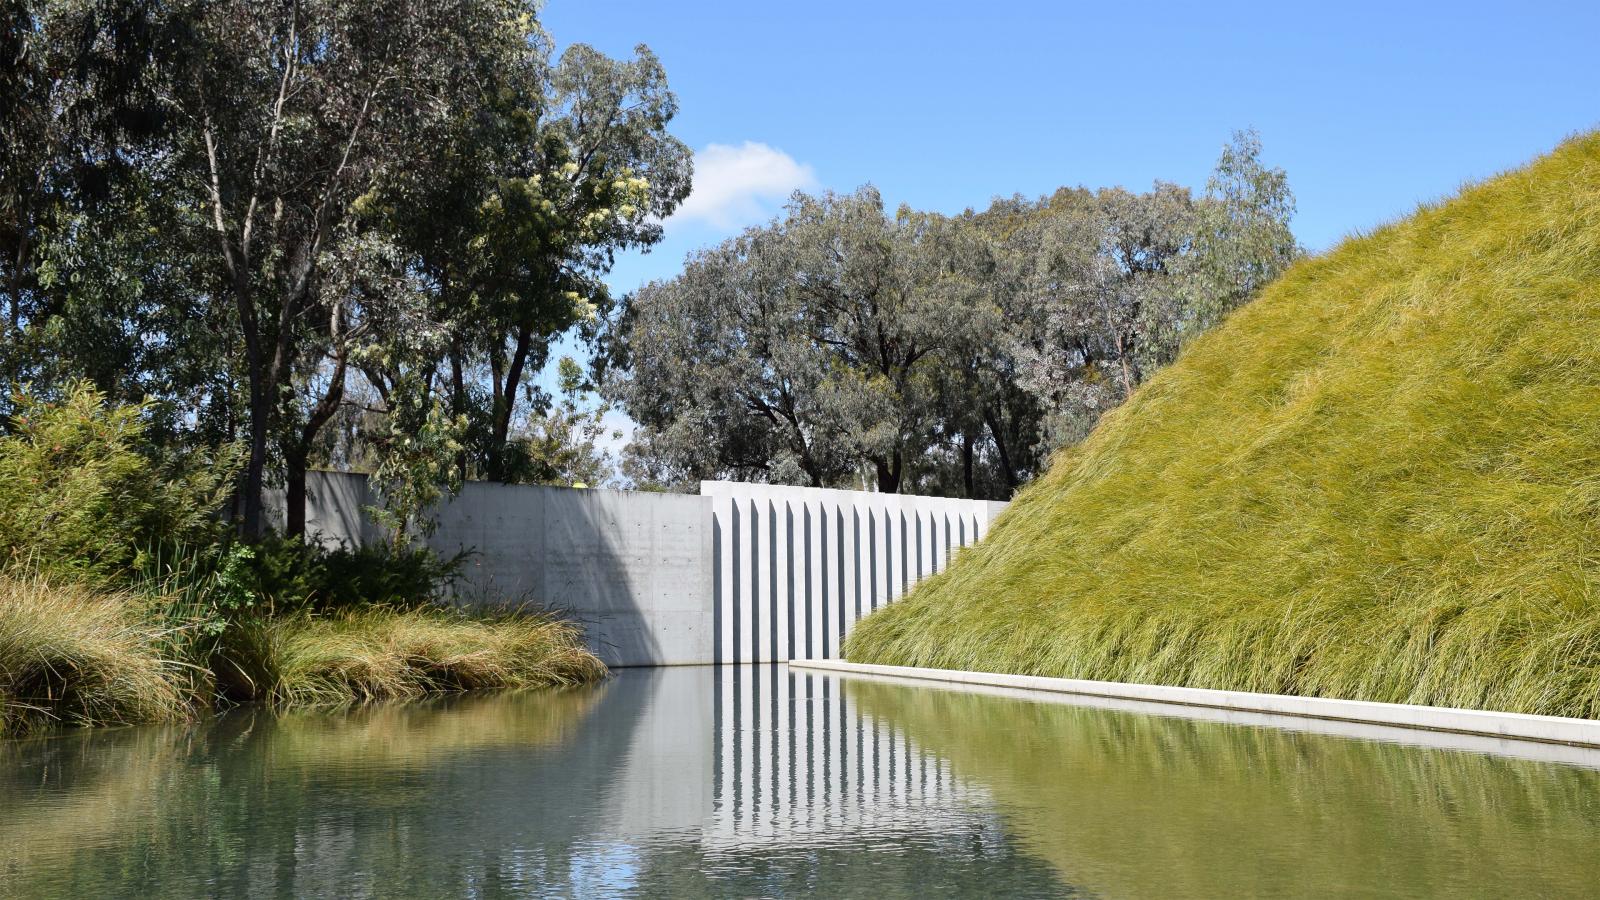 A serene landscape featuring a reflective pond bordered by tall grasses and trees in the Australian Garden. A modern, white, geometric wall with vertical lines stands at the edge of the pond, creating a striking contrast with the natural greenery and blue sky in the background.